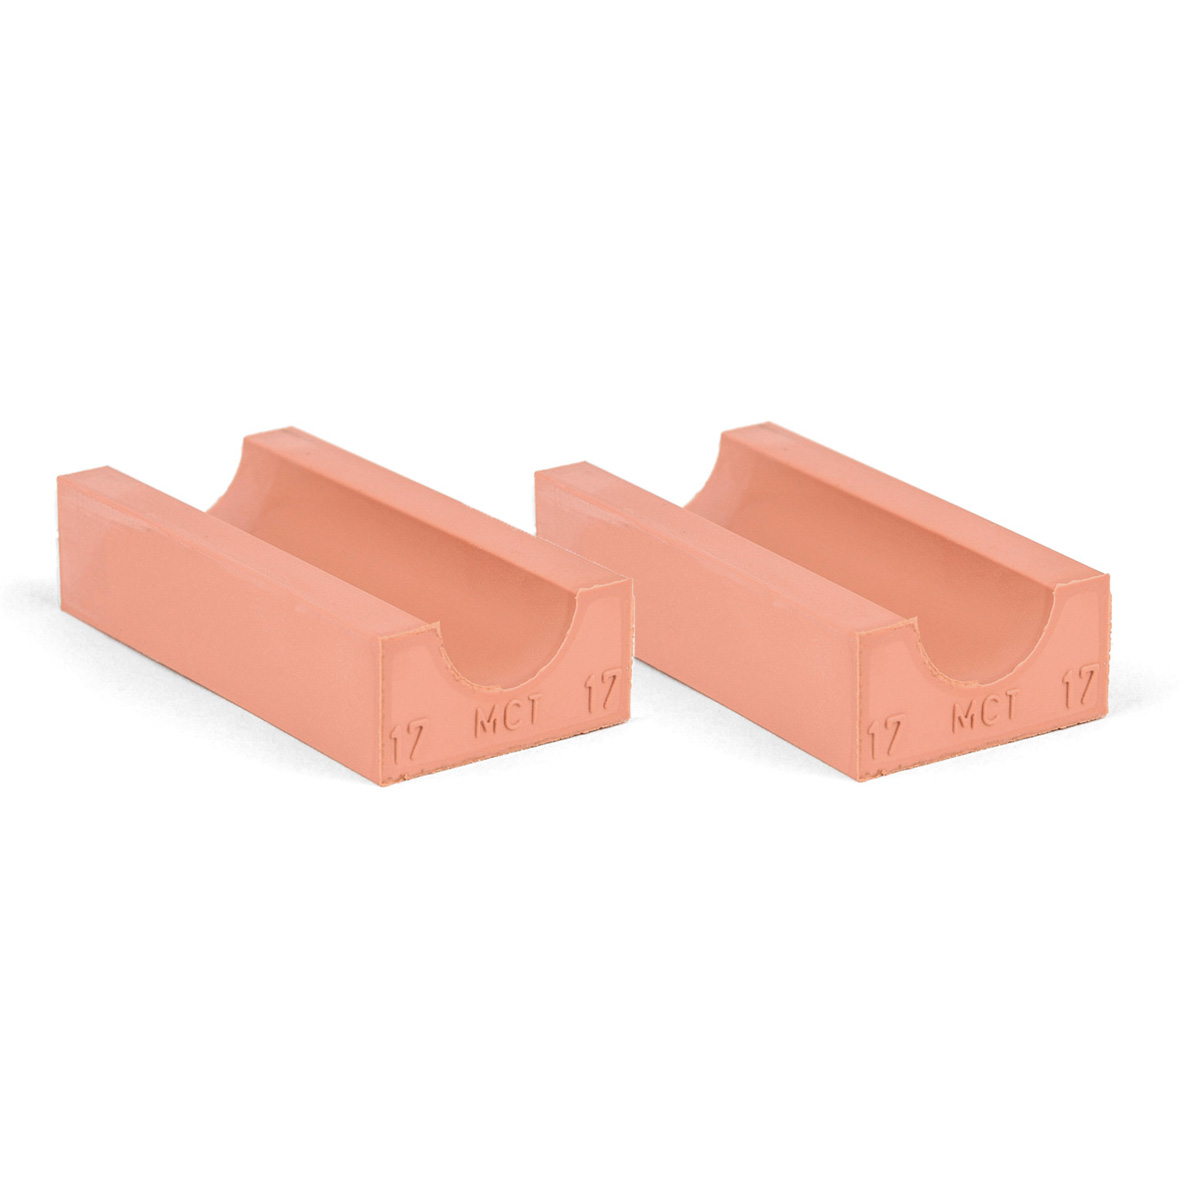 30-17*2 Set of 2 half insert block lycron 30mm, 30-17 for cable/pipe diam. 16.5-17.5mm